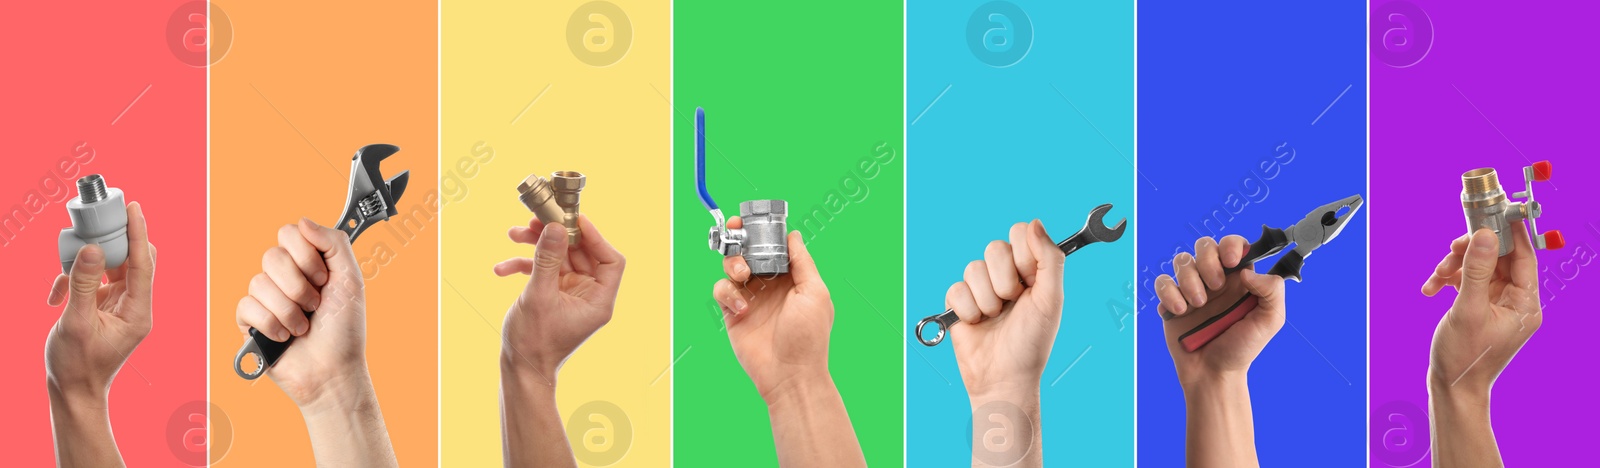 Image of Collage with photos of men holding plumbing tools on different color backgrounds. Banner design